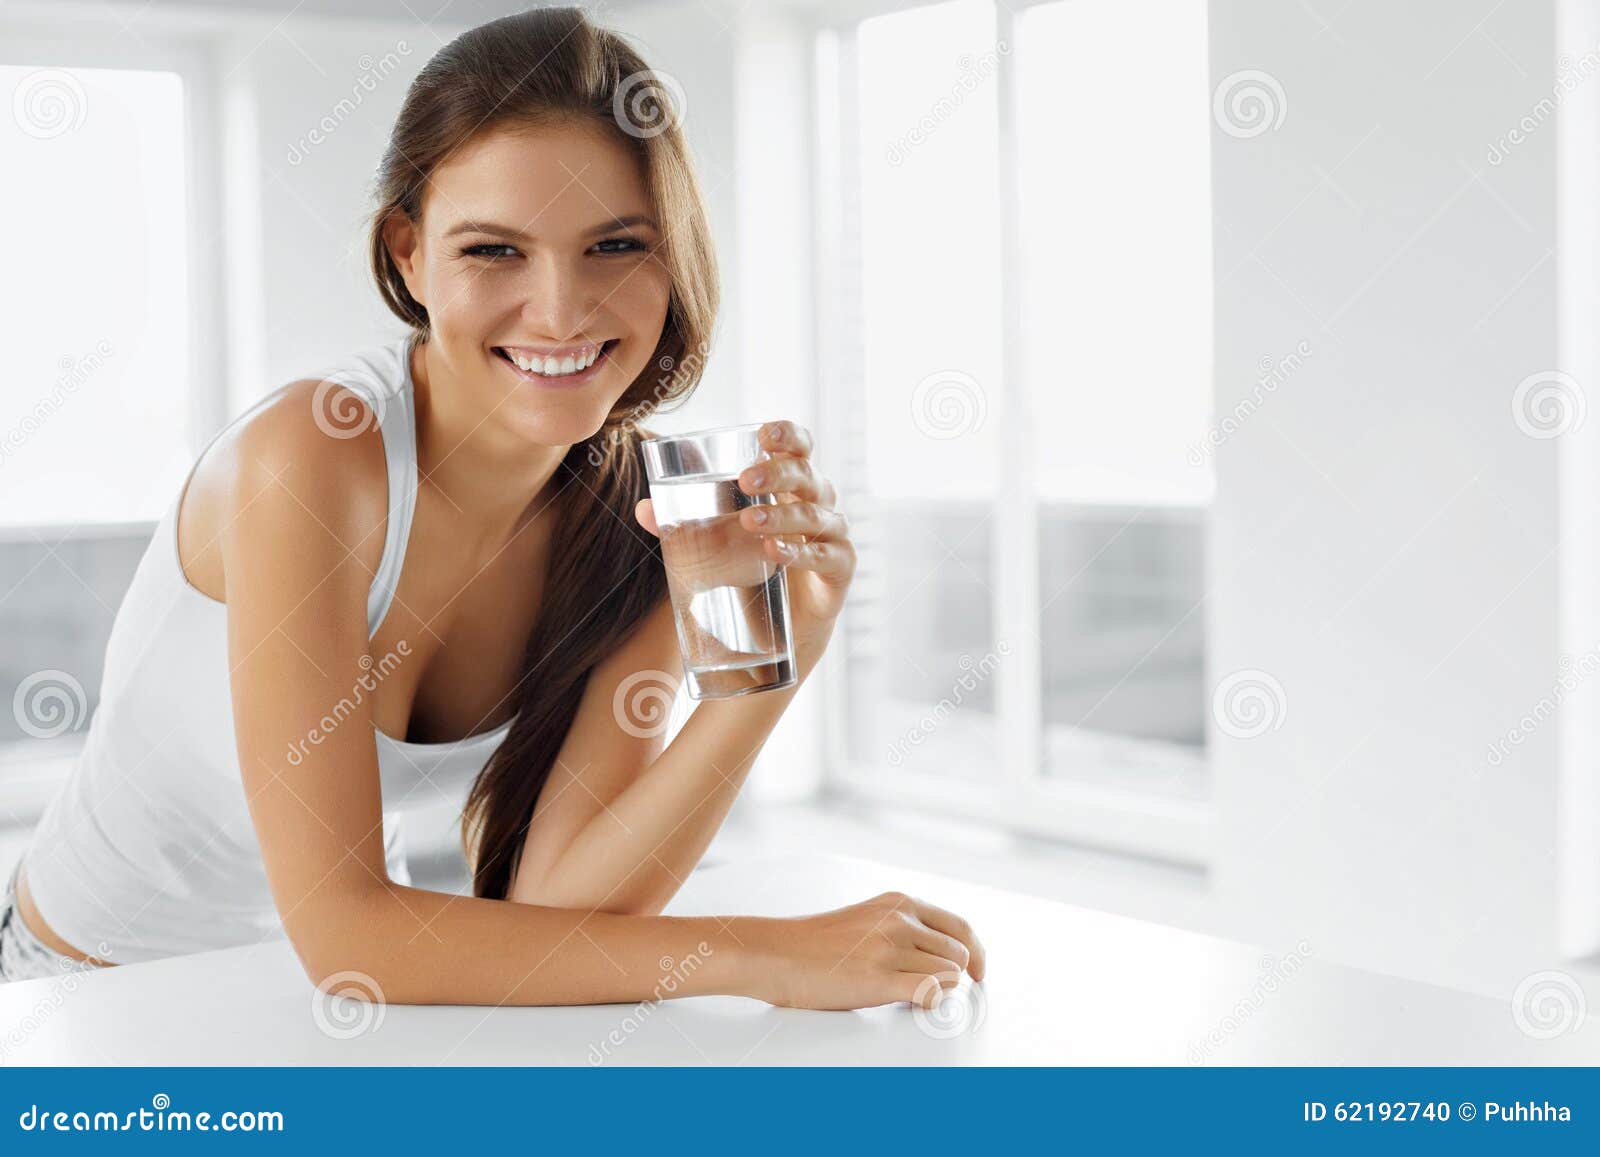 healthy lifestyle. happy woman with glass of water. drinks. heal